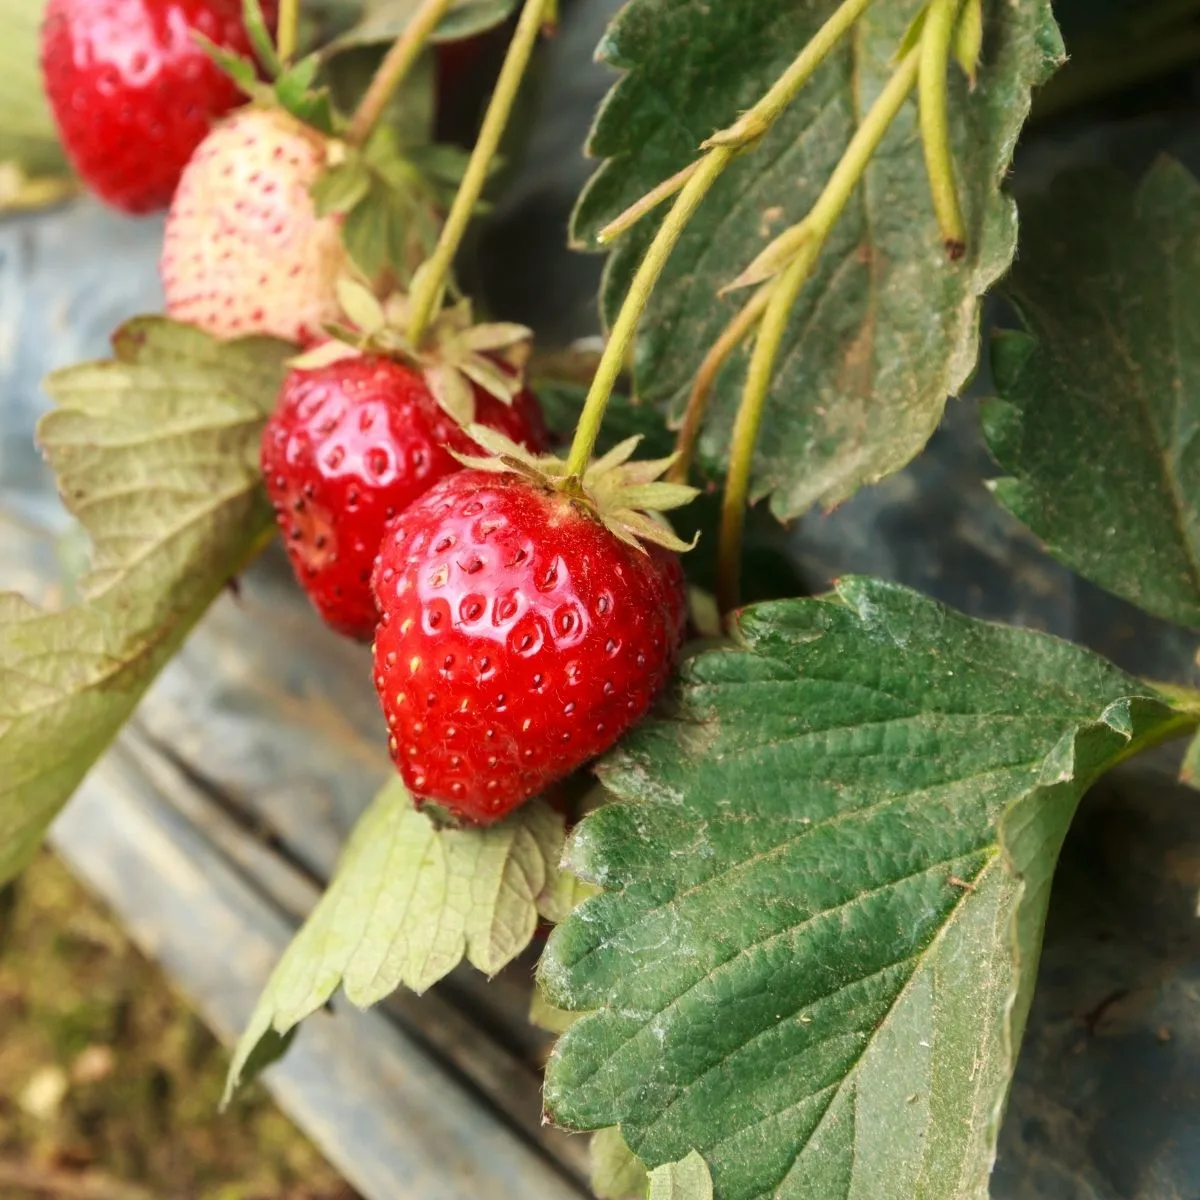 ripe strawberries ready to harvest